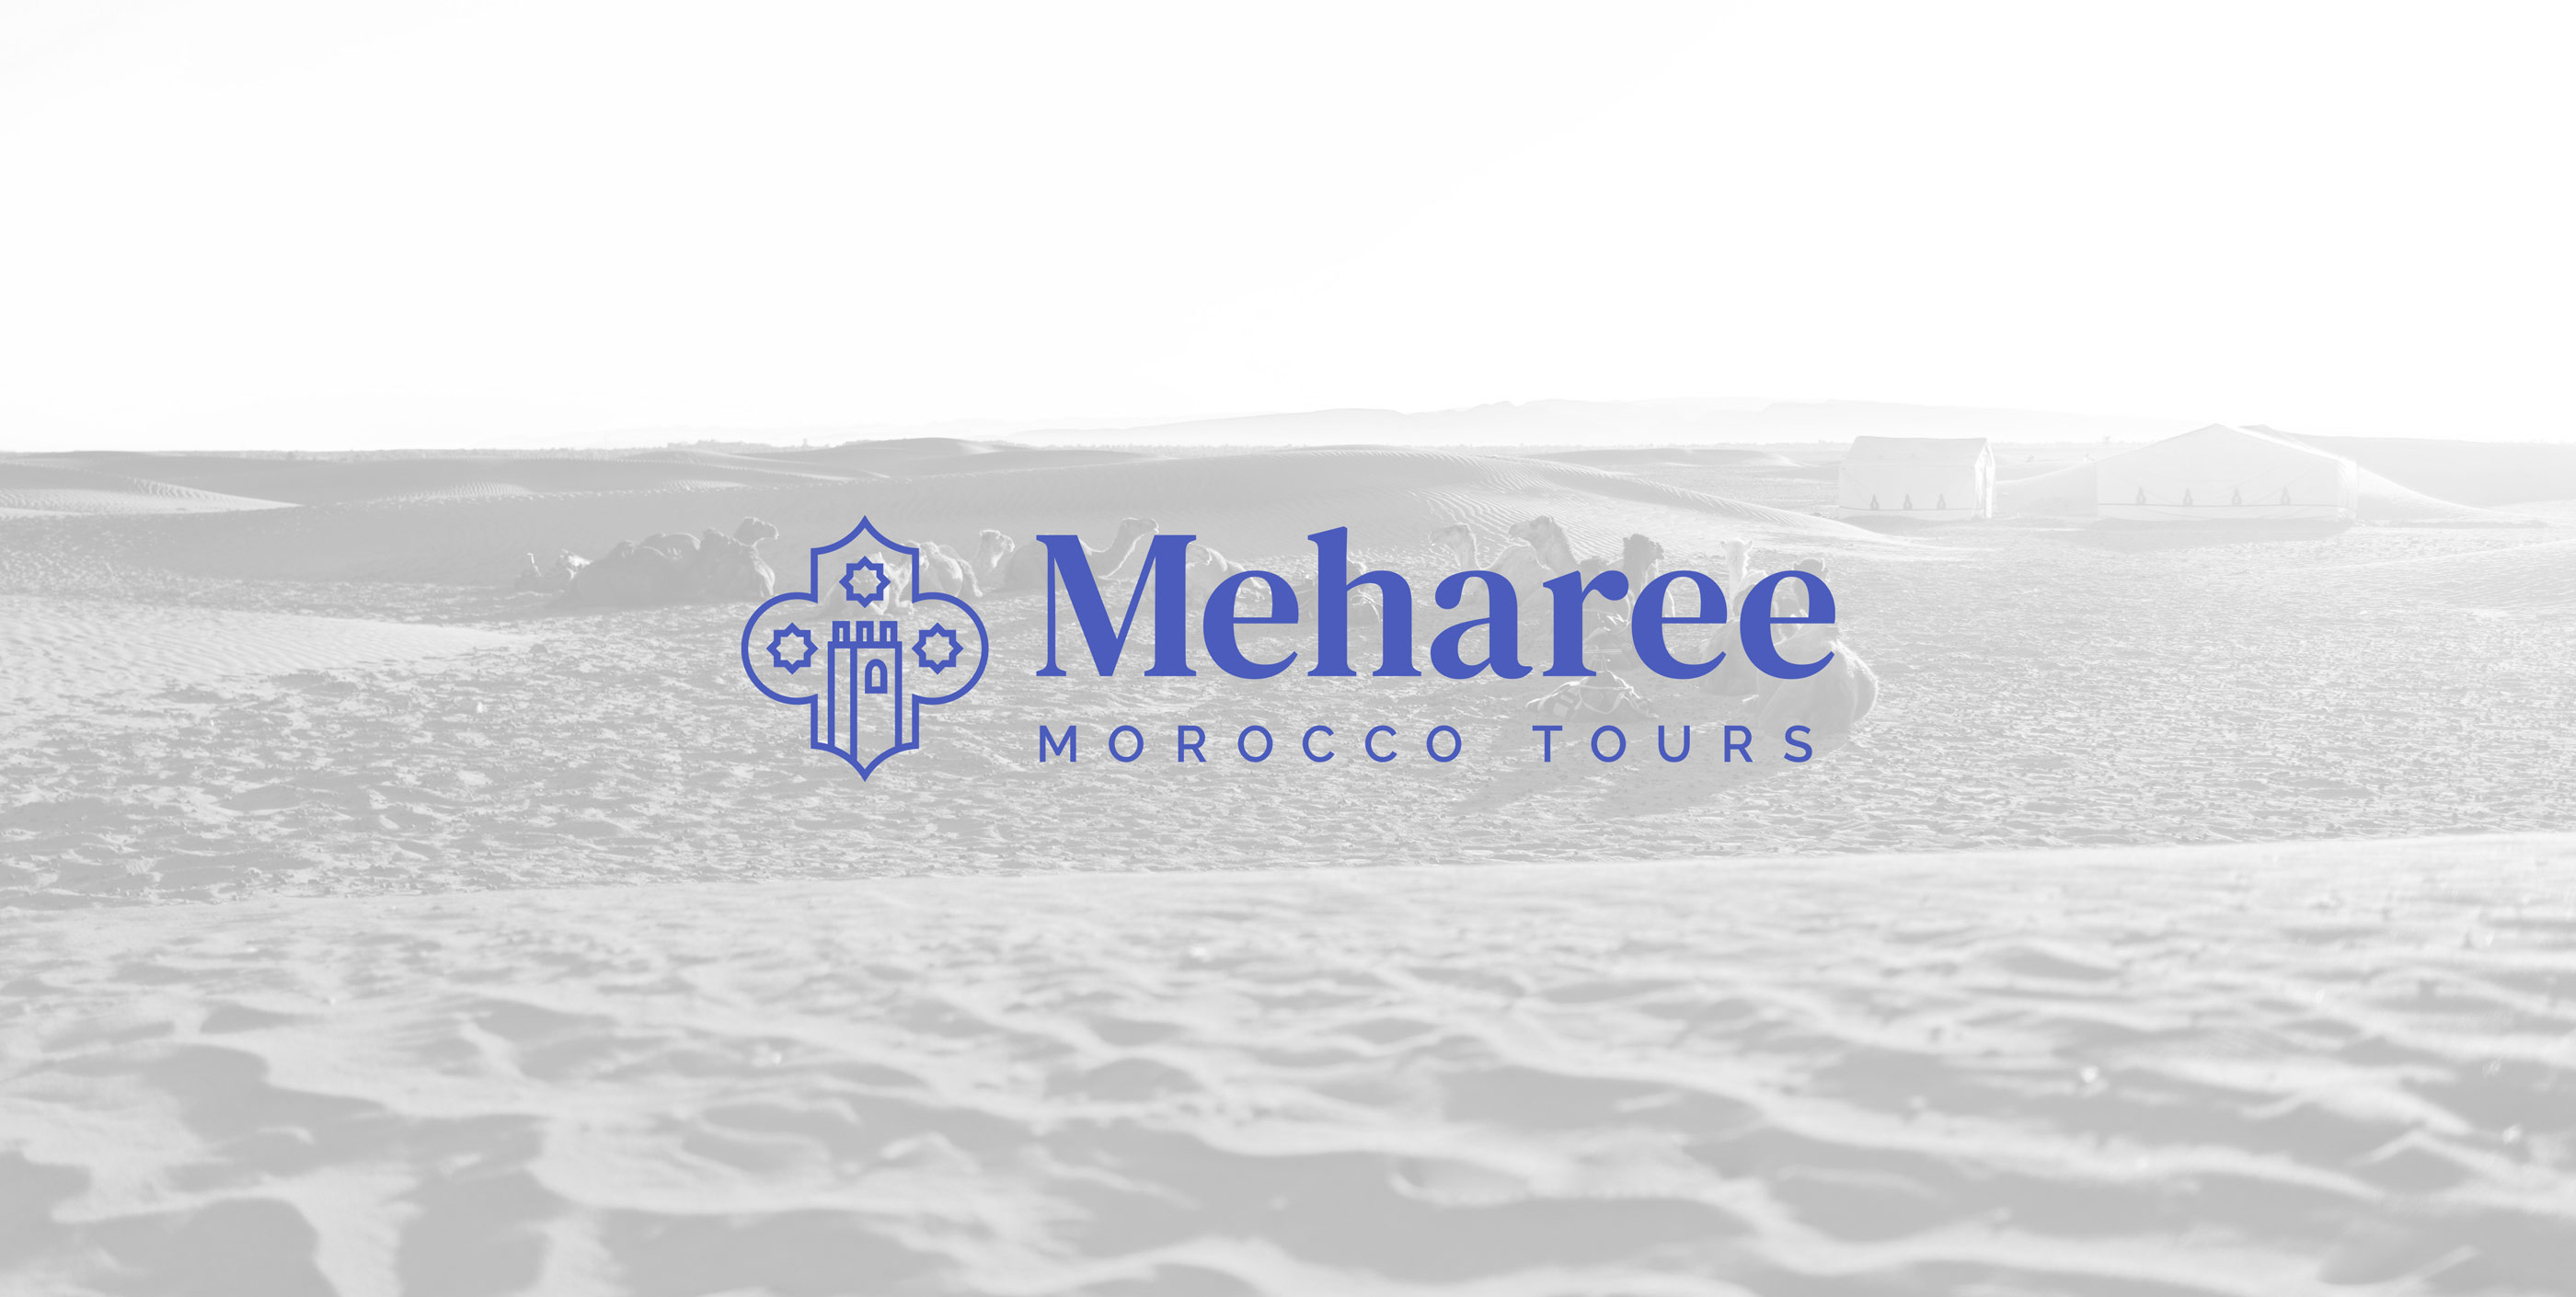 Meharee Morocco Tours Logo Design Superimposed Over Camels and Desert Image by Karbon Branding